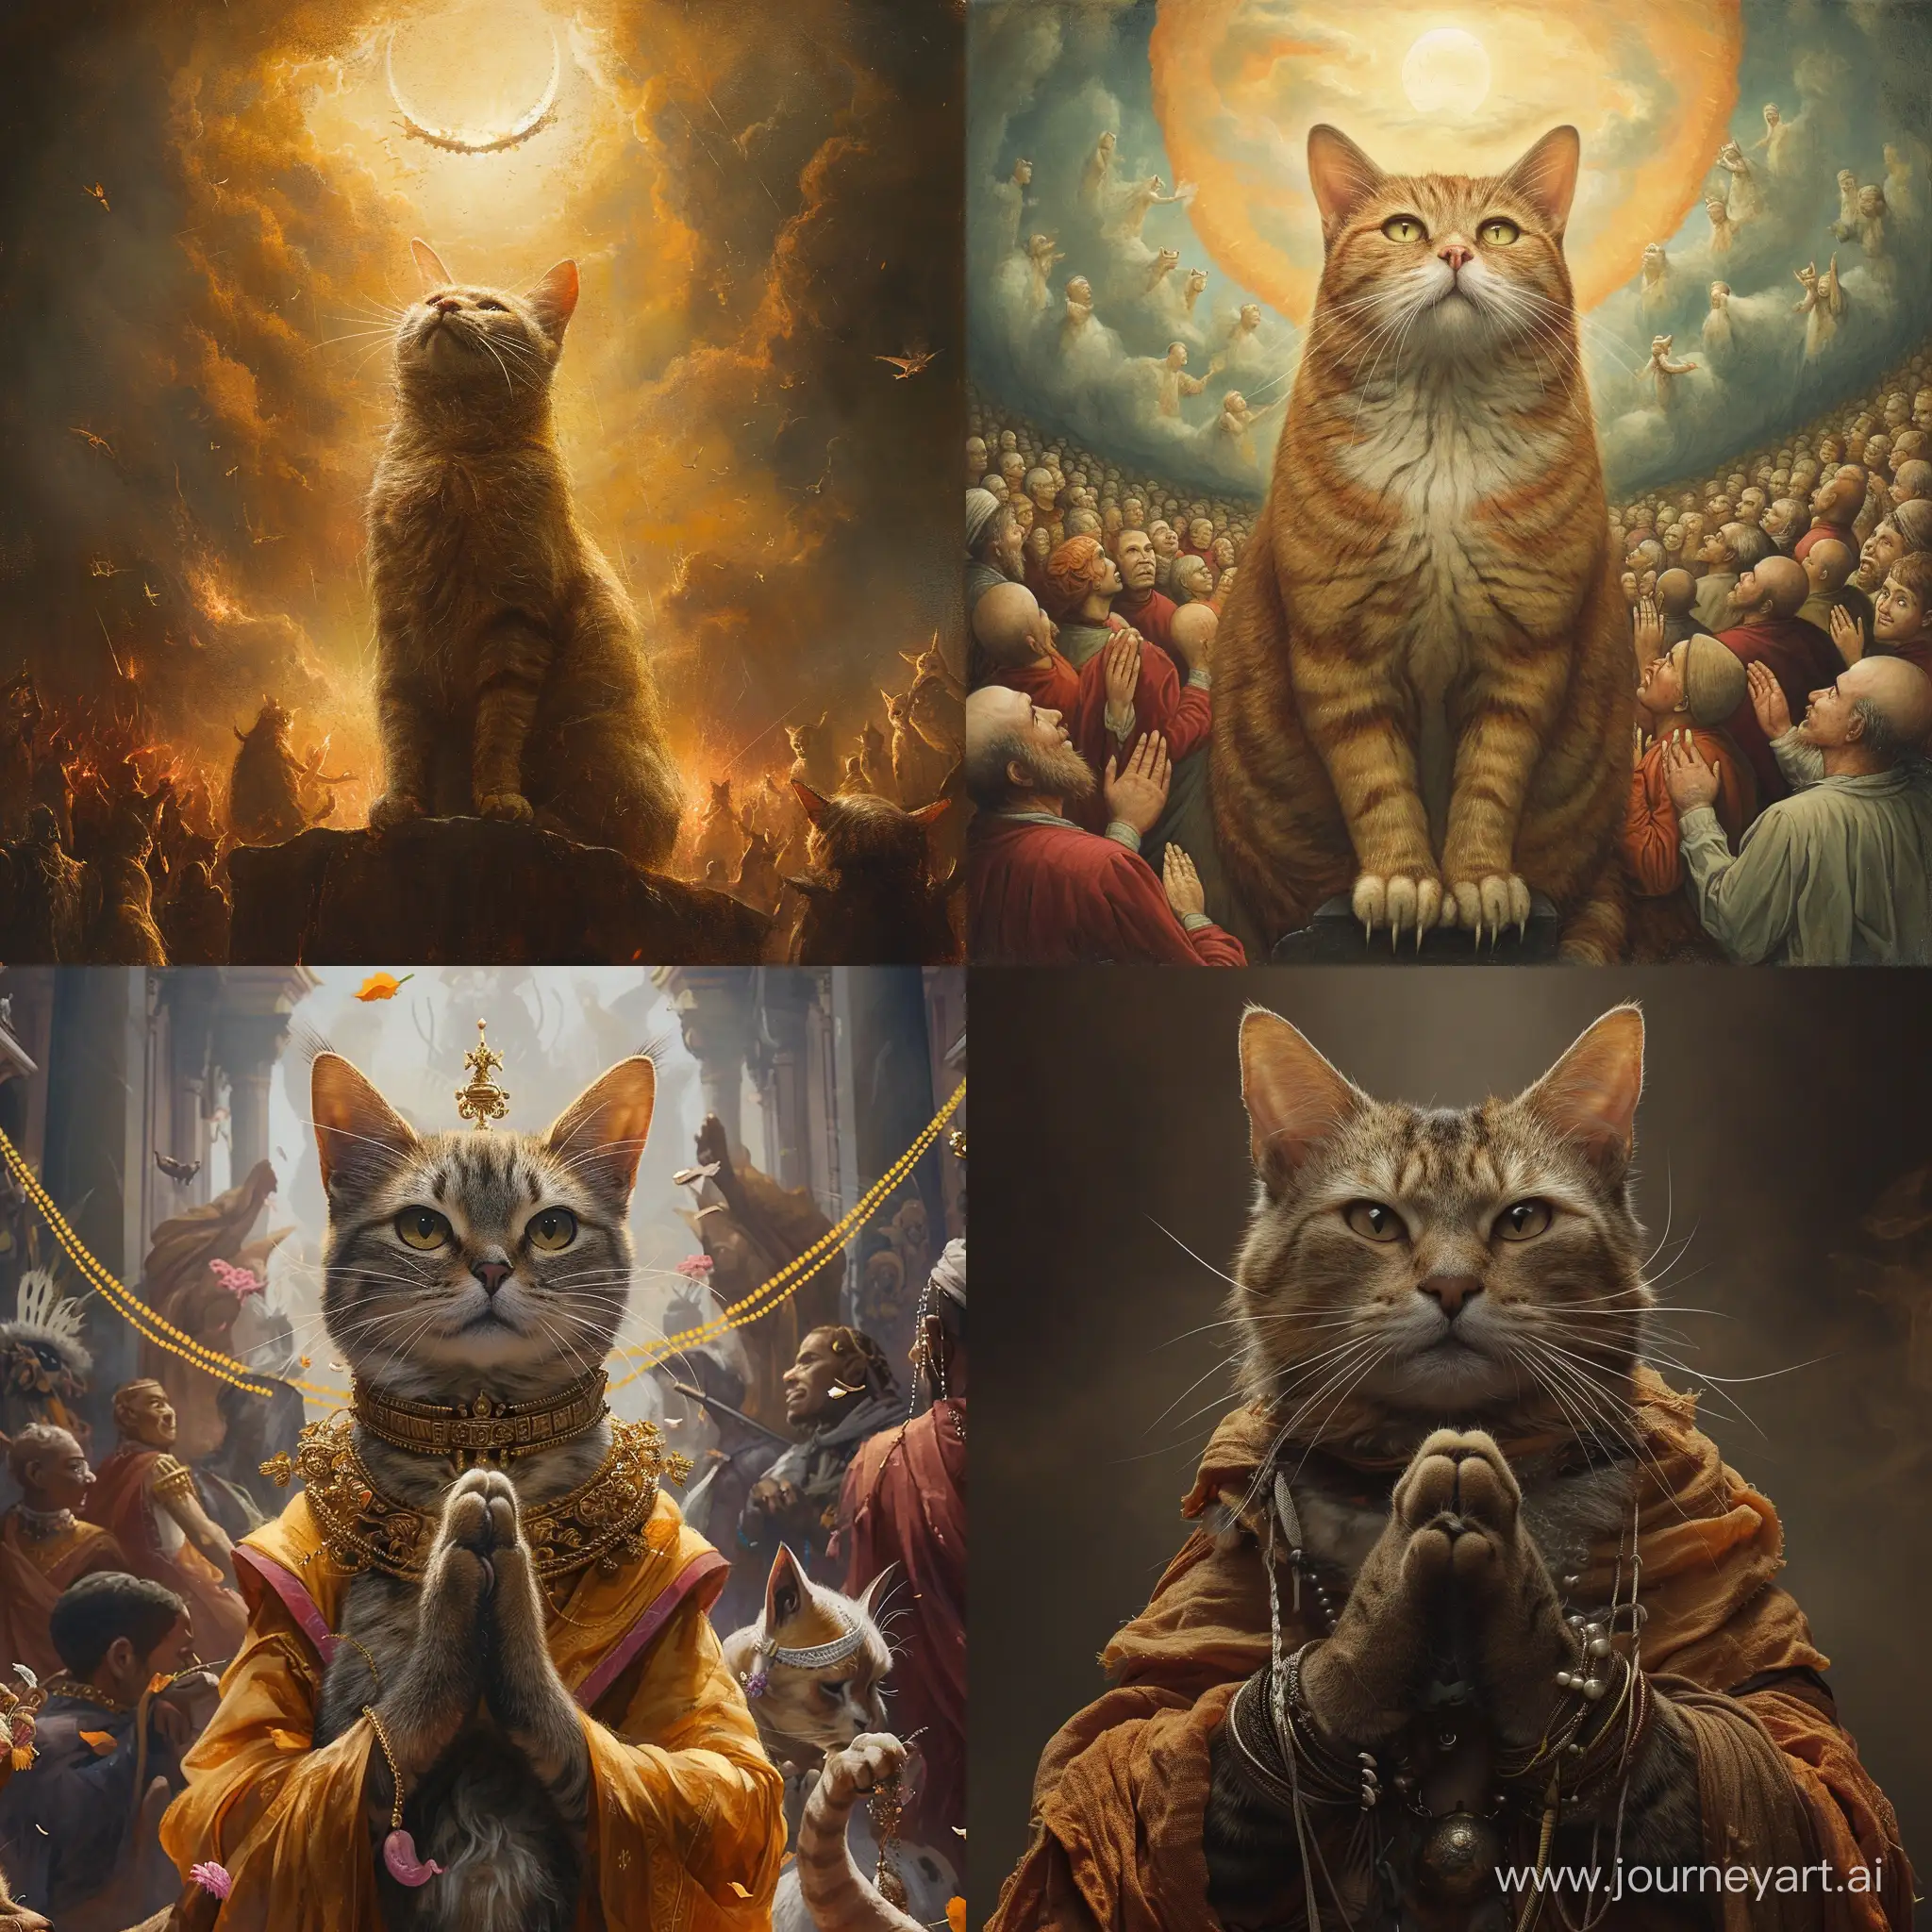 God in the form of a cat, people worship a cat